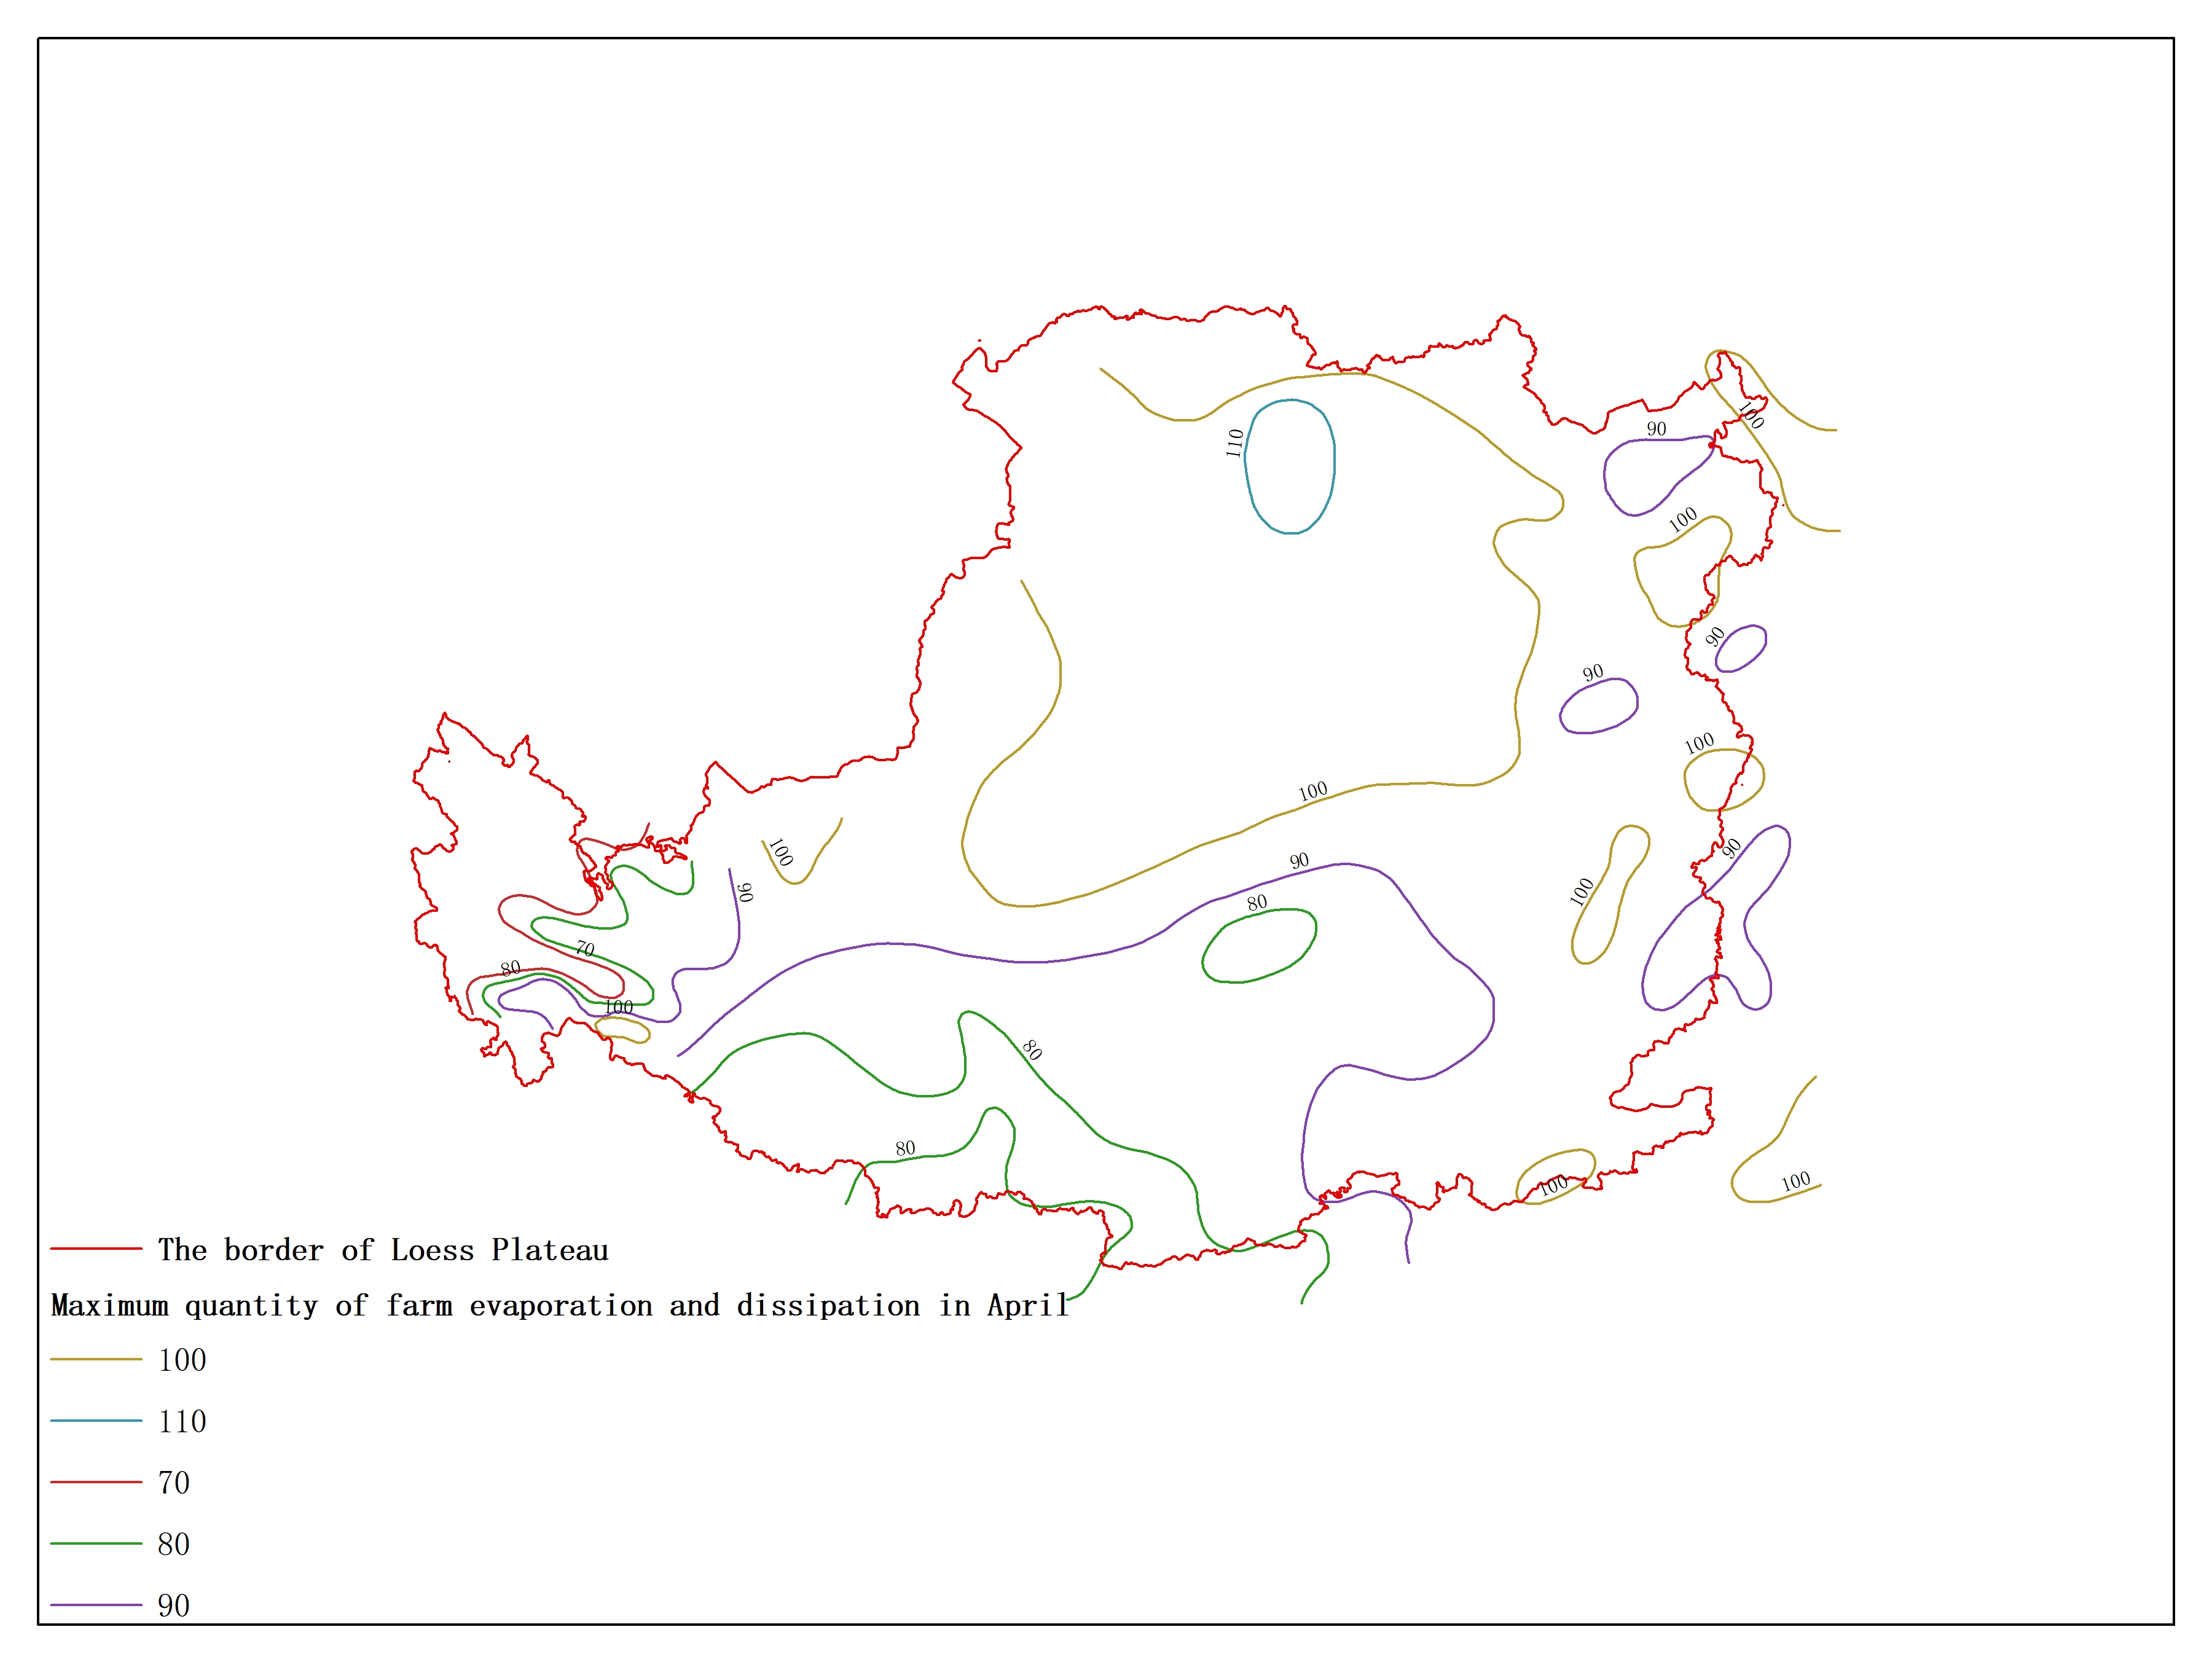 Agricultural climate resource atlas of Loess Plateau-Maximum quantity of farm evaporation and dissipation in April